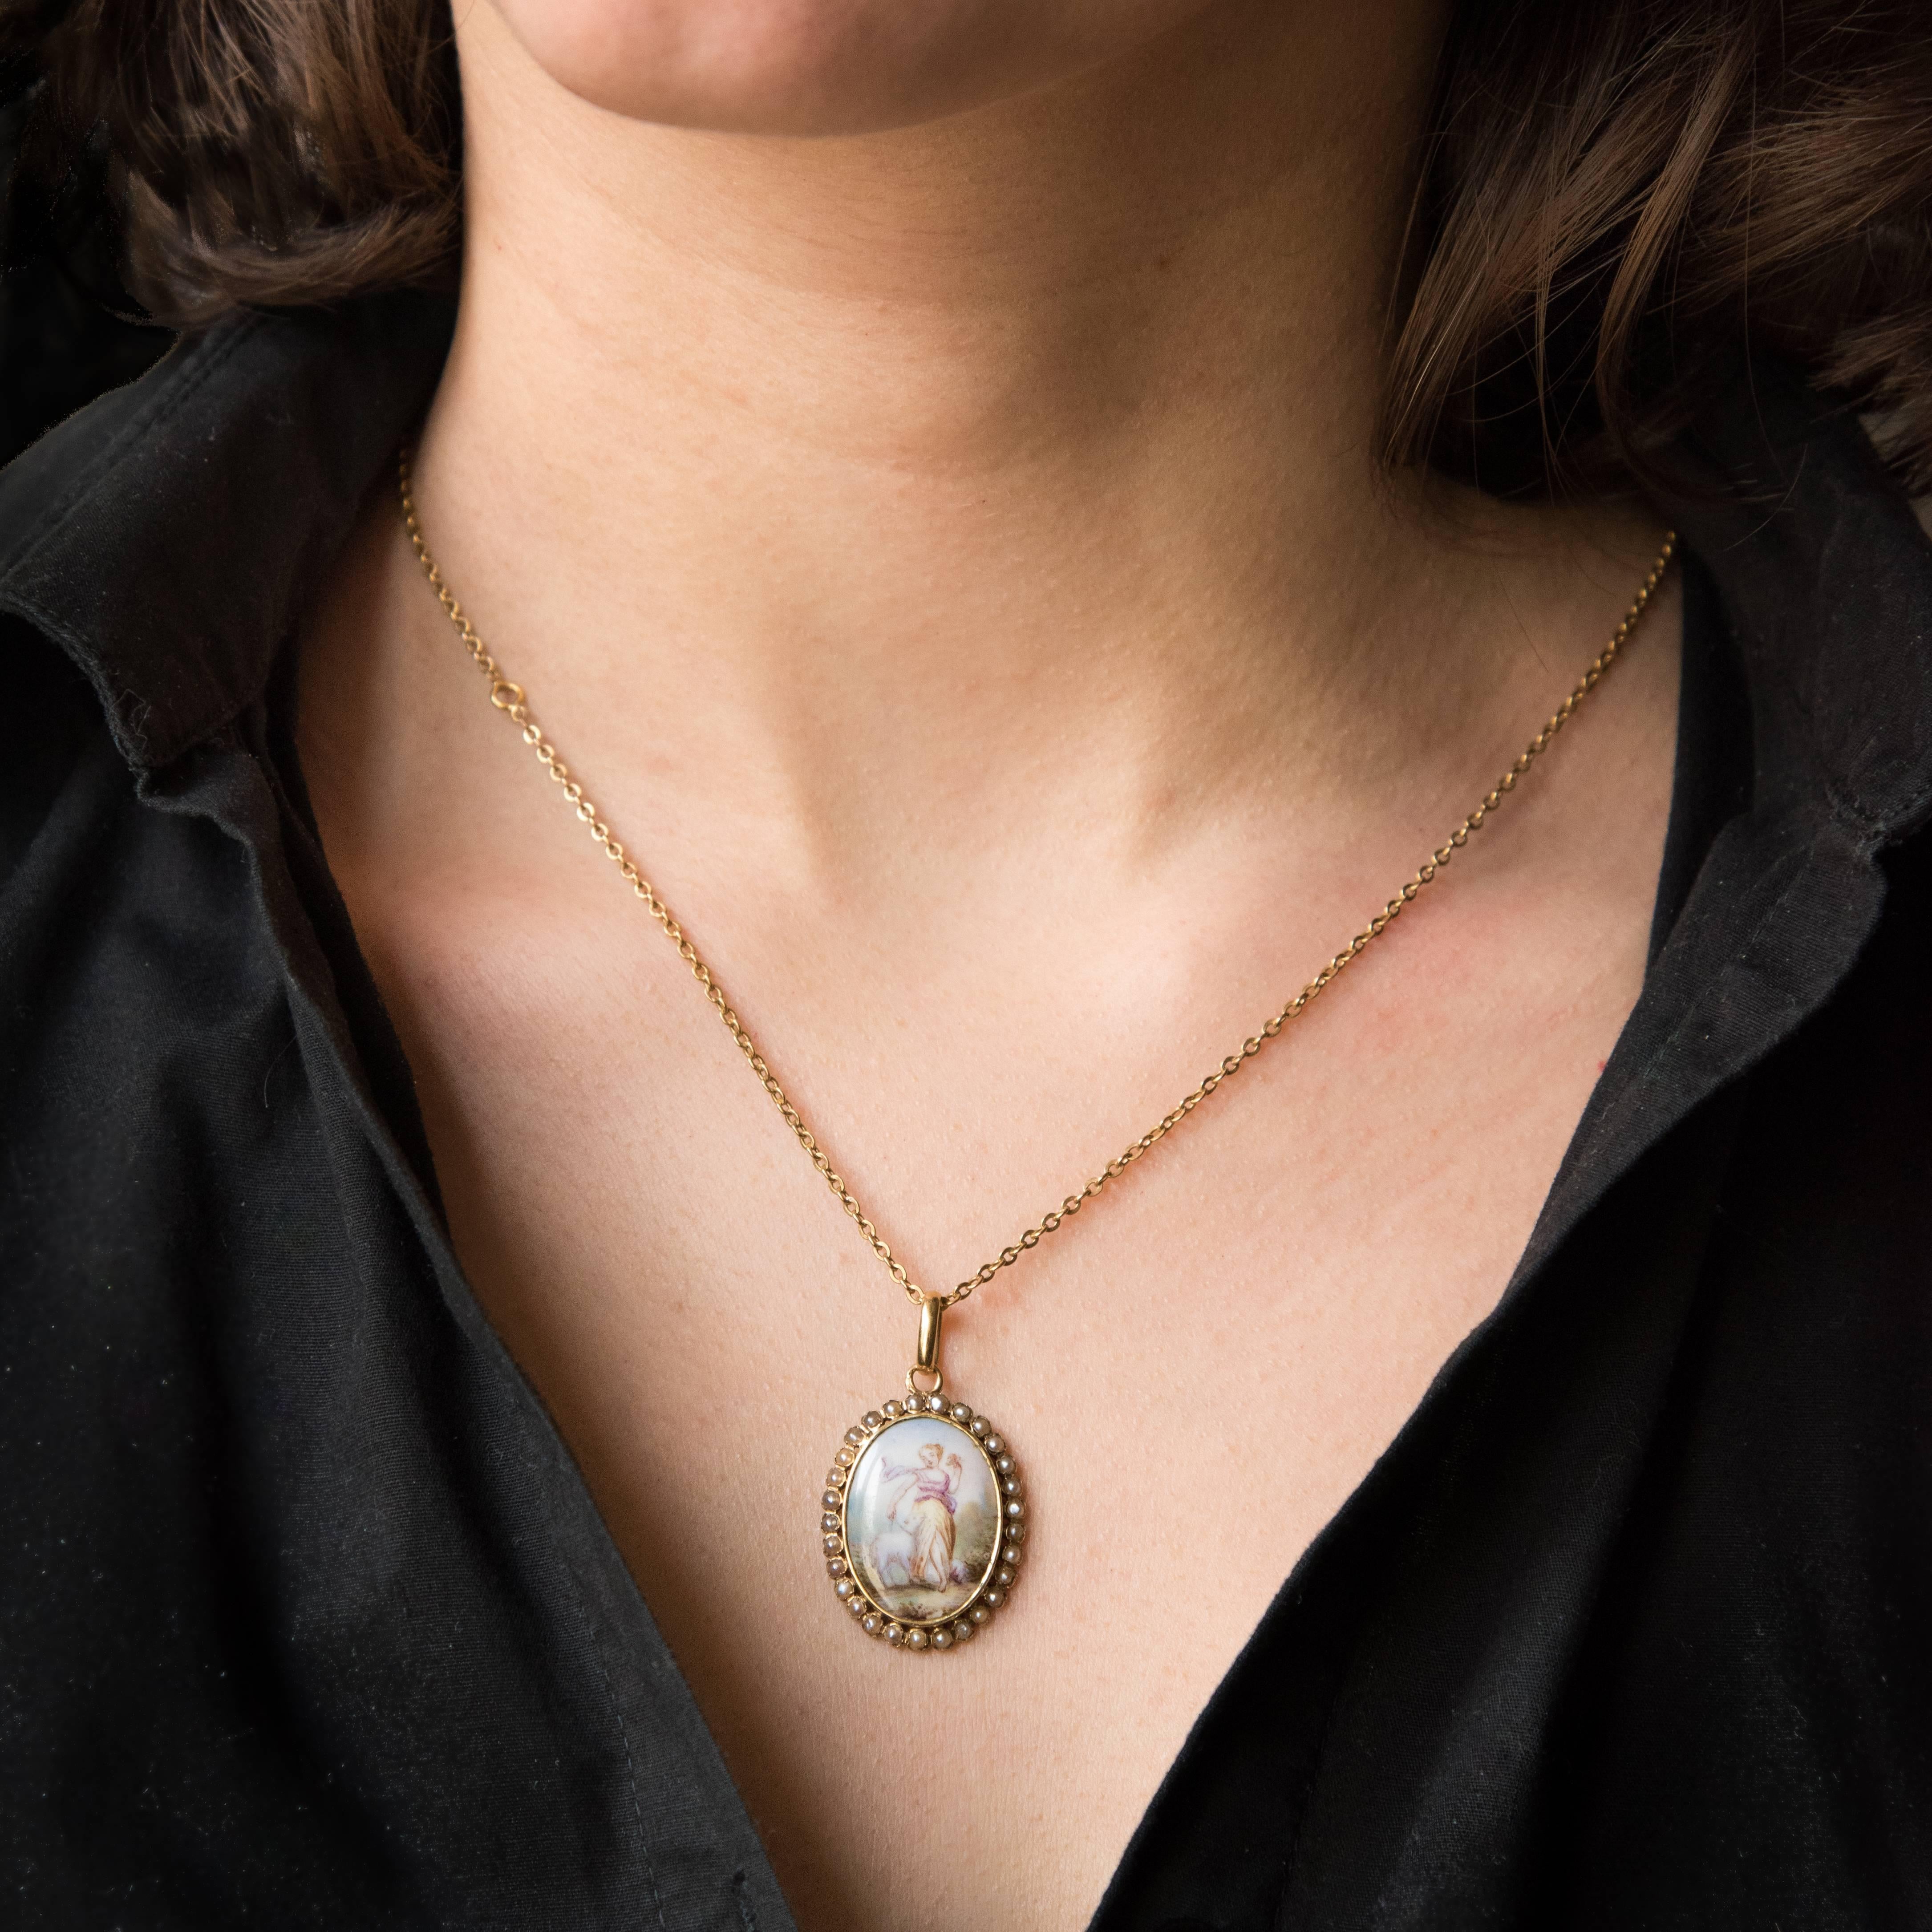 Pendant in 18 karats yellow gold, eagle's head hallmark.
Oval shaped, this antique pendant is closed set in the center of a porcelain miniature surrounded by natural pearls also closed set. The back of the miniature is mother of pearl.
Height: 3.4